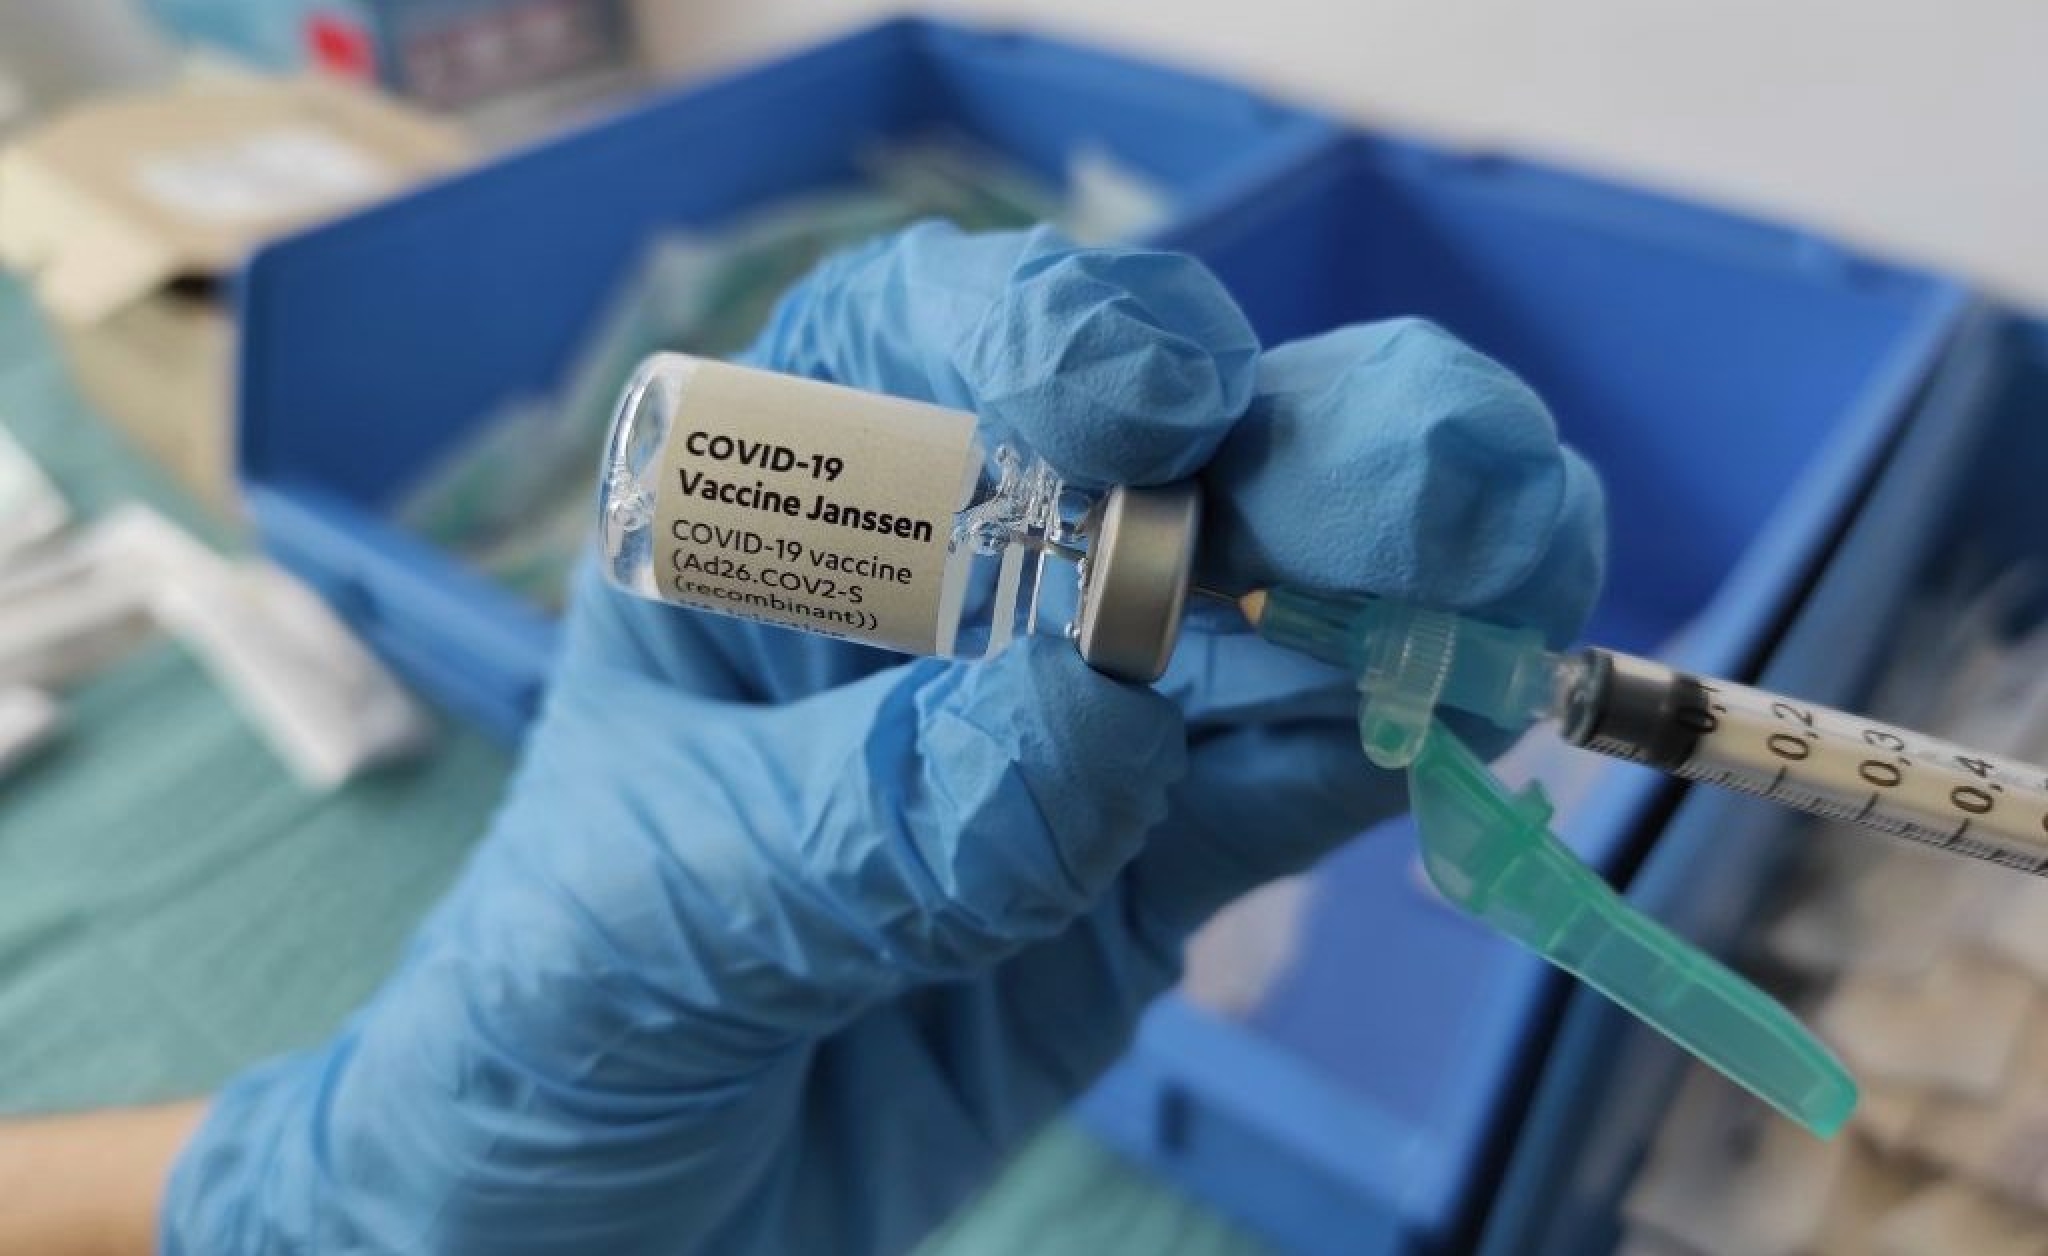 Use of the J&J Vaccine for COVID-19 Can Resume, Says CDC Review Panel